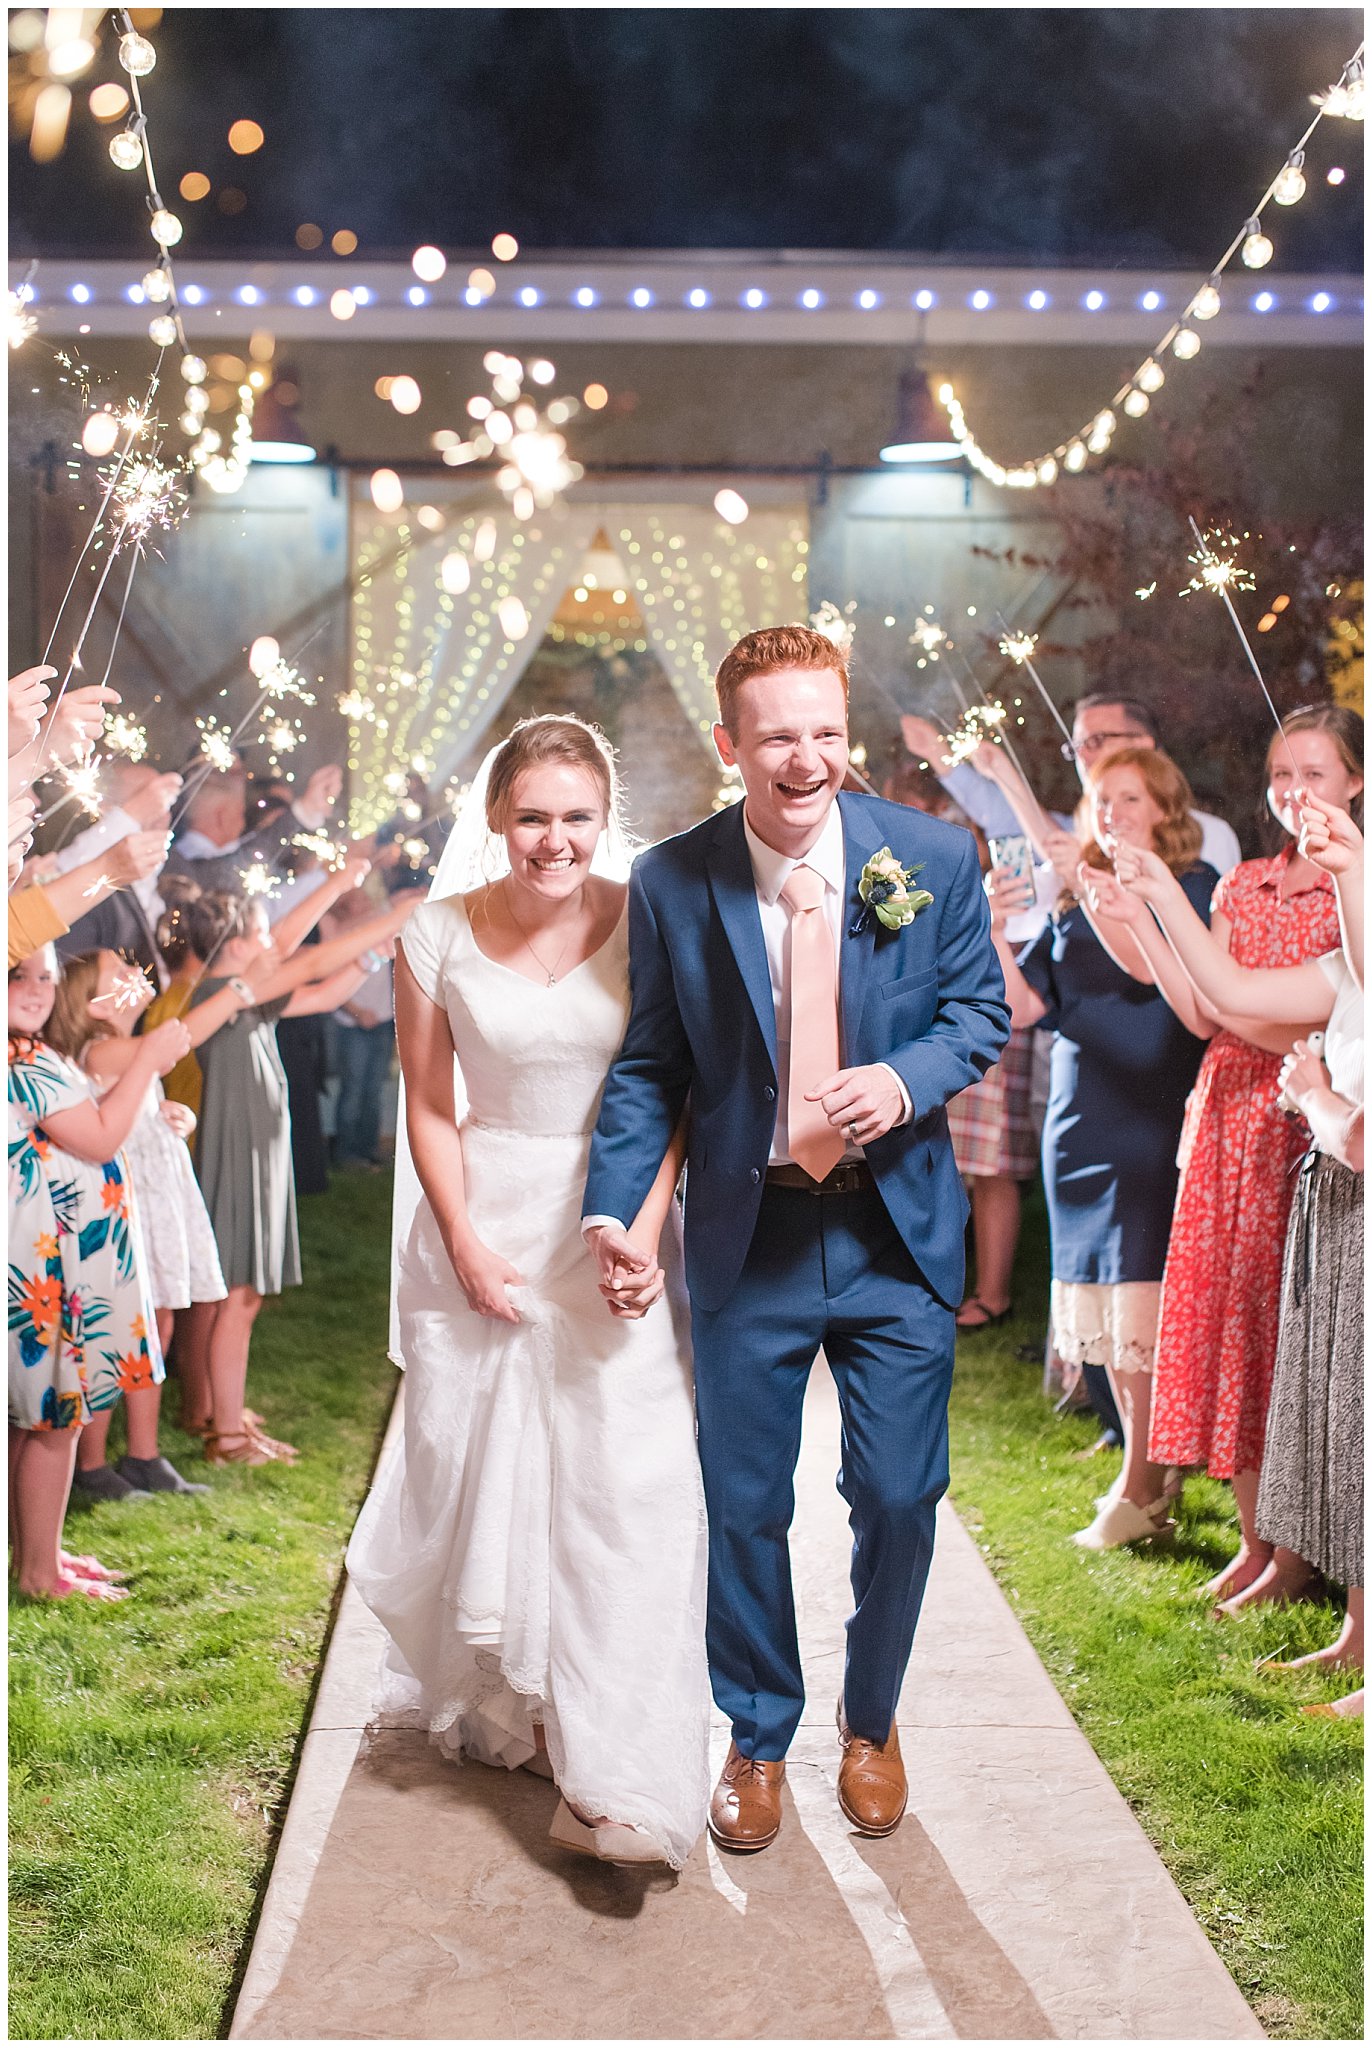 Sparkler exit sendoff with hanging string lights above bride and groom | Oak Hills Reception and Events Center | Jessie and Dallin Photography